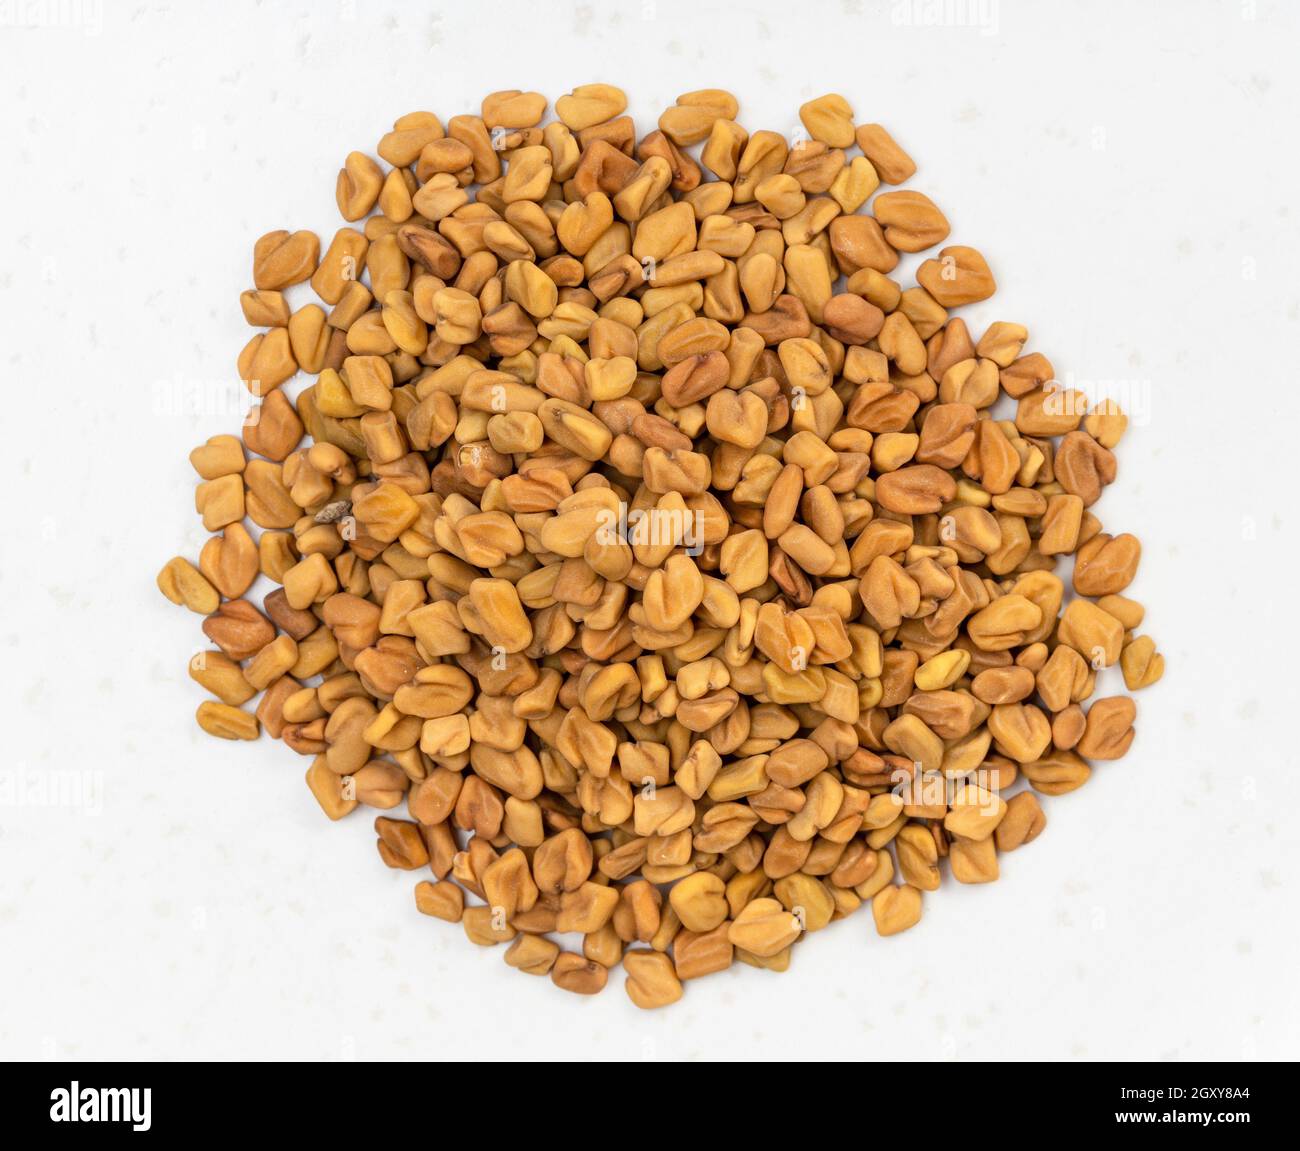 top view of pile of whole fenugreek seeds close up on gray ceramic plate Stock Photo